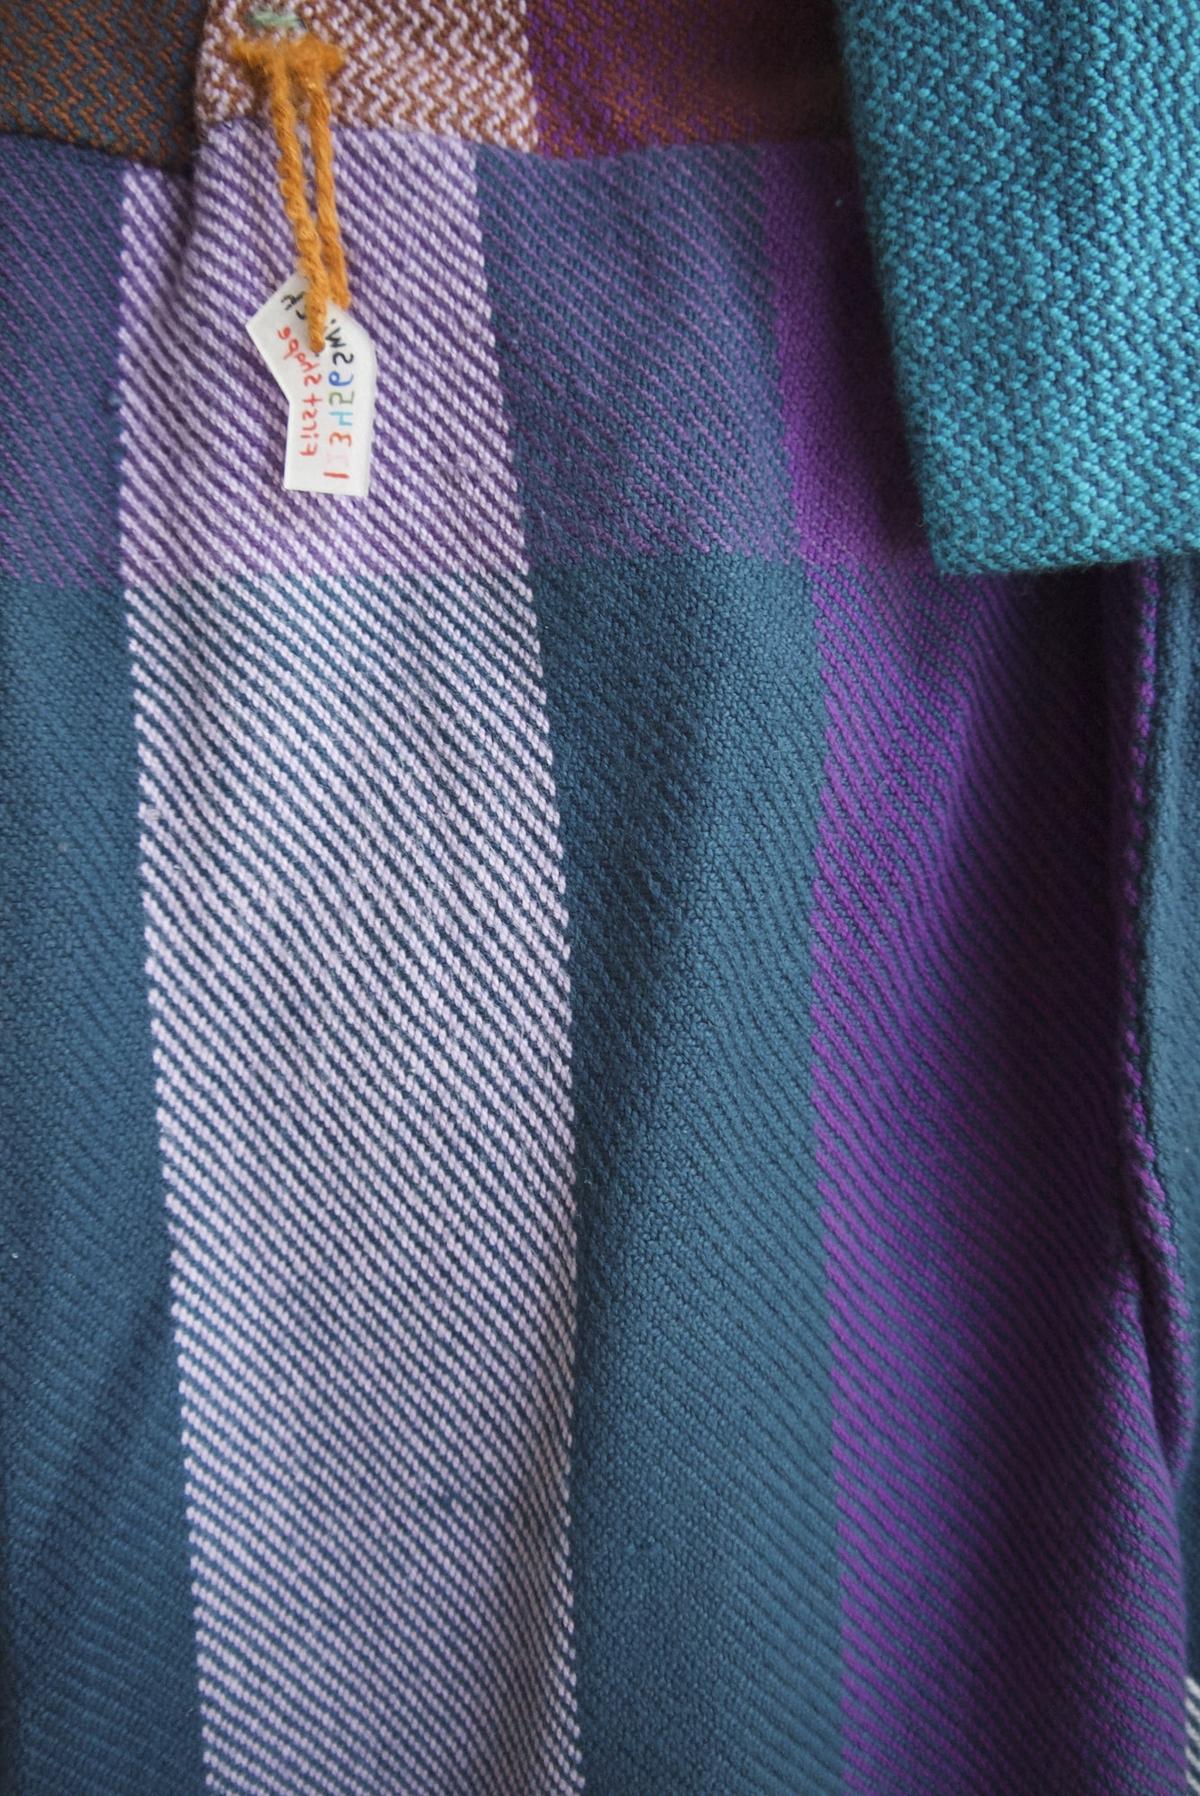 the simple twill weave up-close, with perpendicular stripes of cyan, purple, and pale lilac